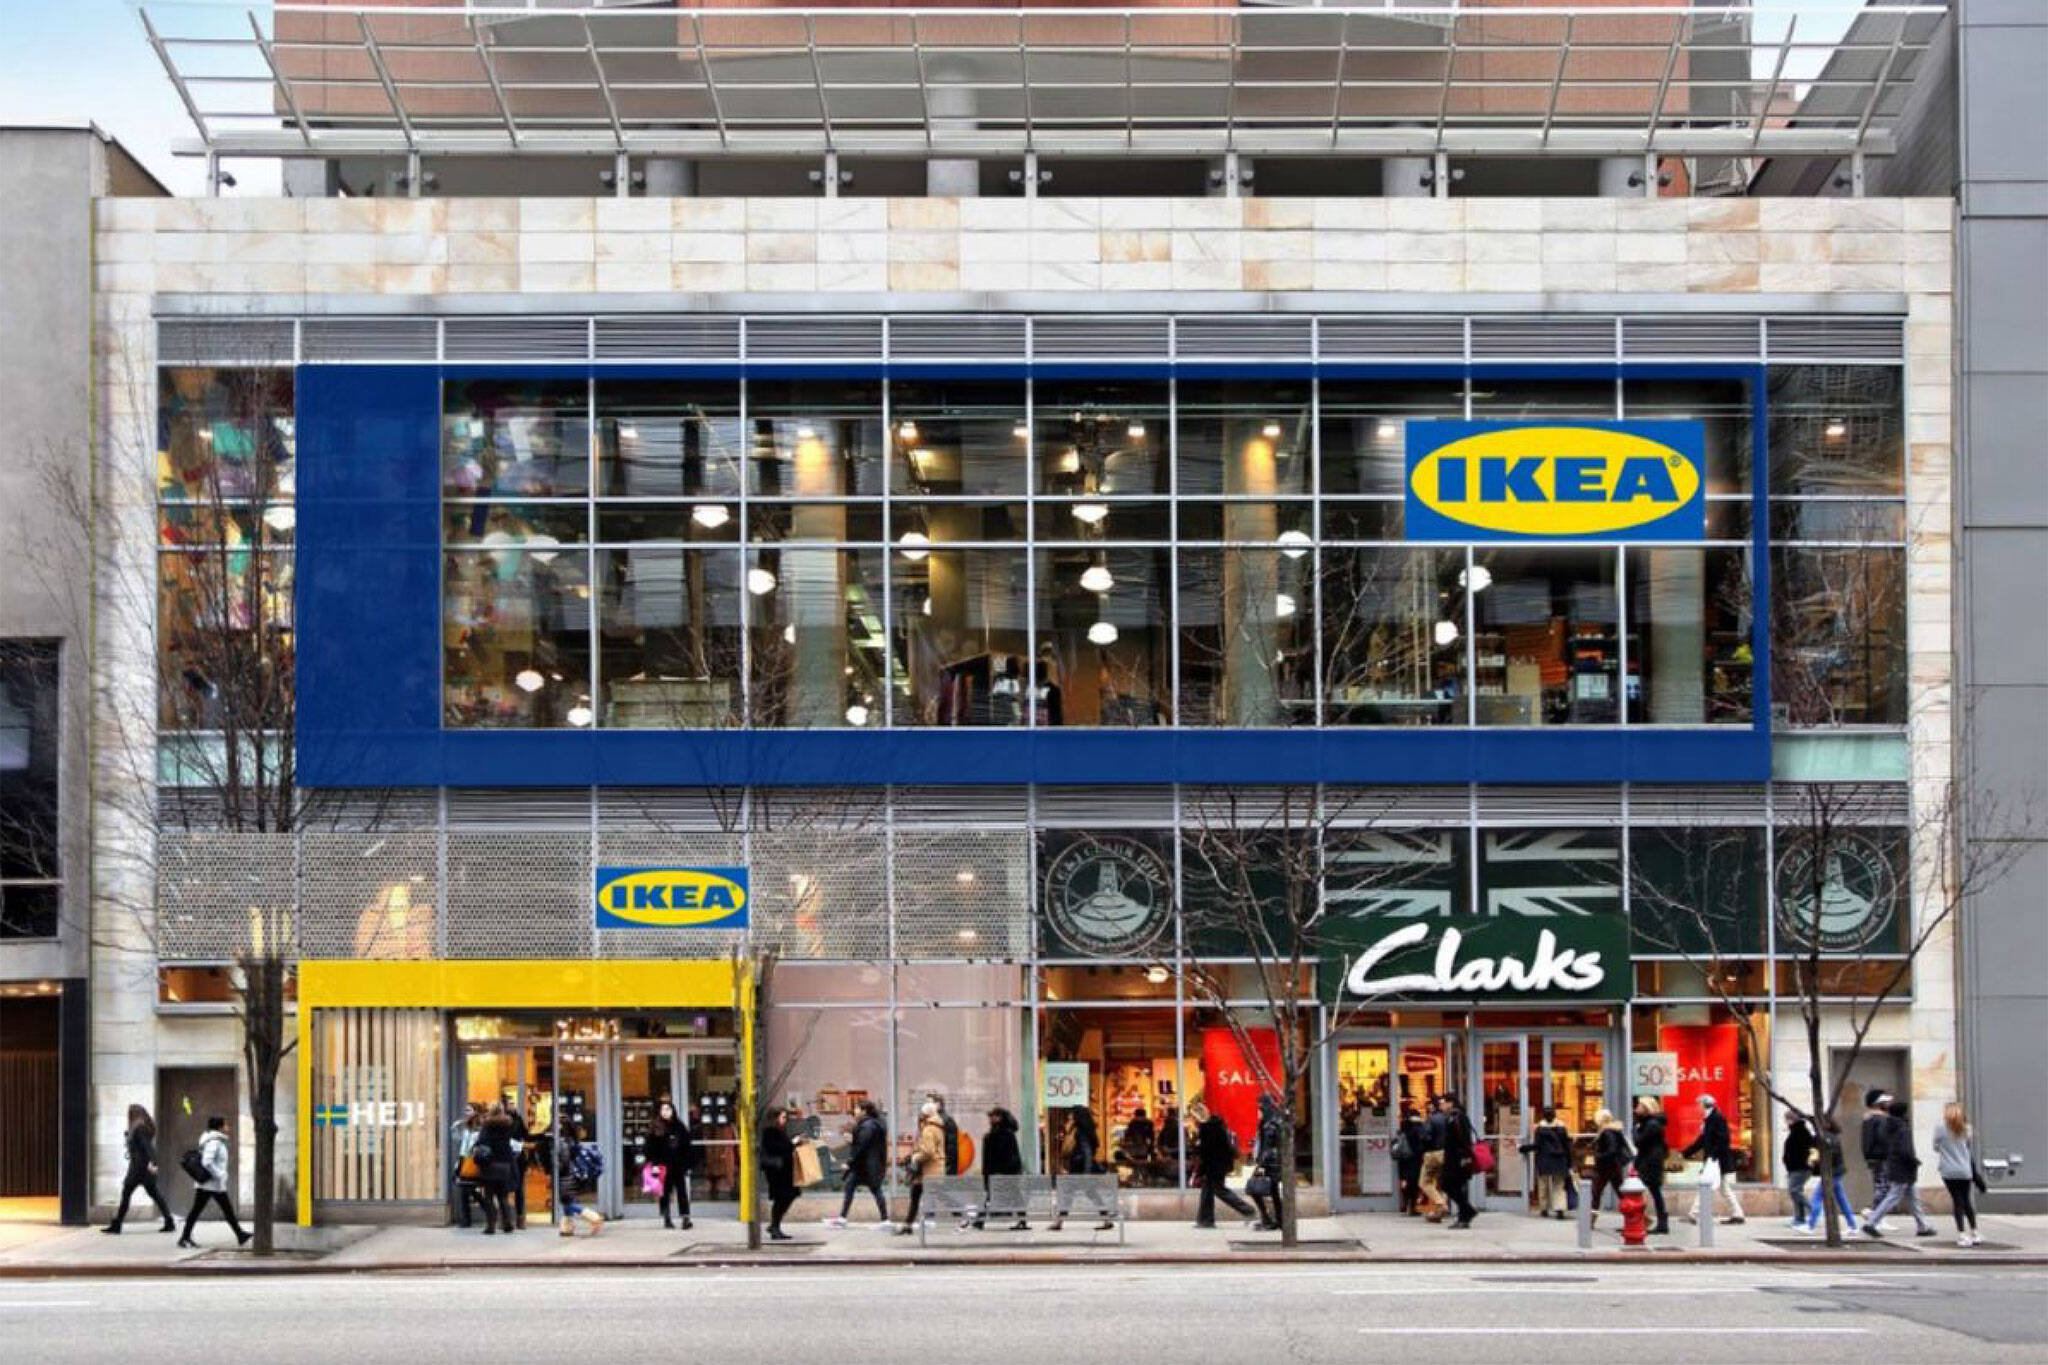 Here's what people can expect at Toronto's new downtown IKEA store